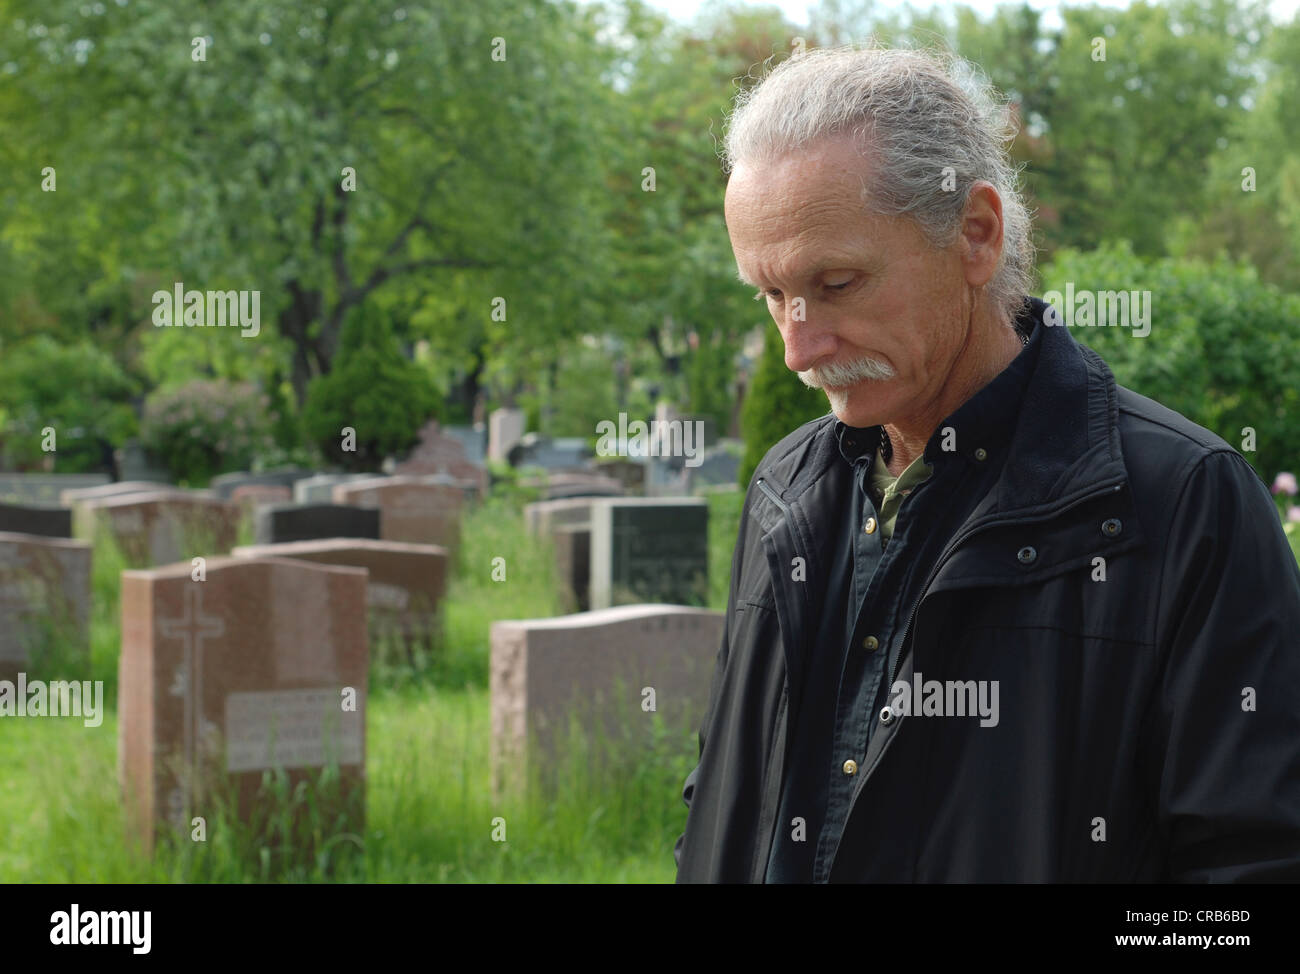 Sorrowful man standing in cemetery with head bowed Stock Photo